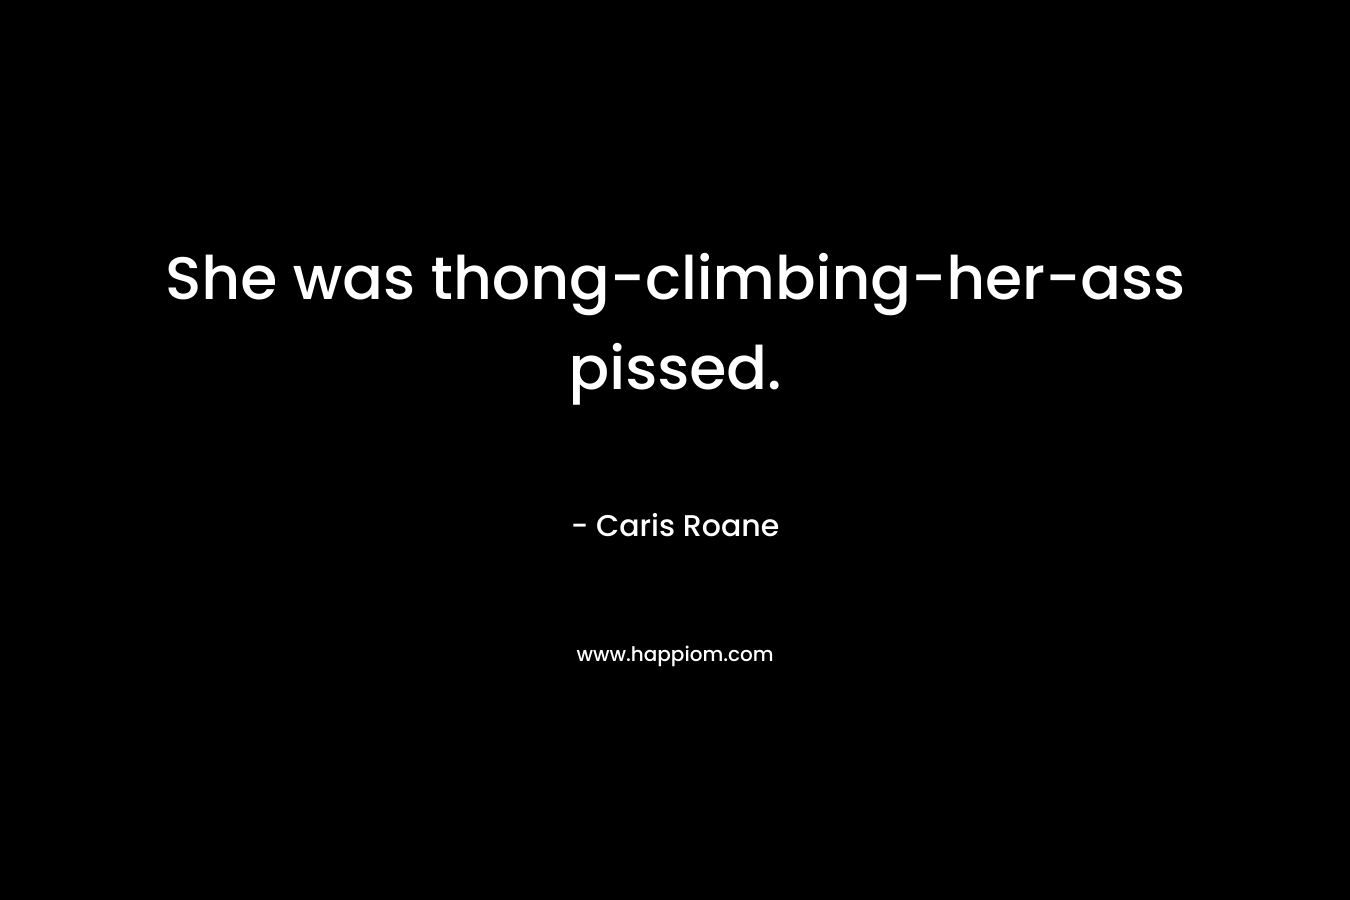 She was thong-climbing-her-ass pissed. – Caris Roane